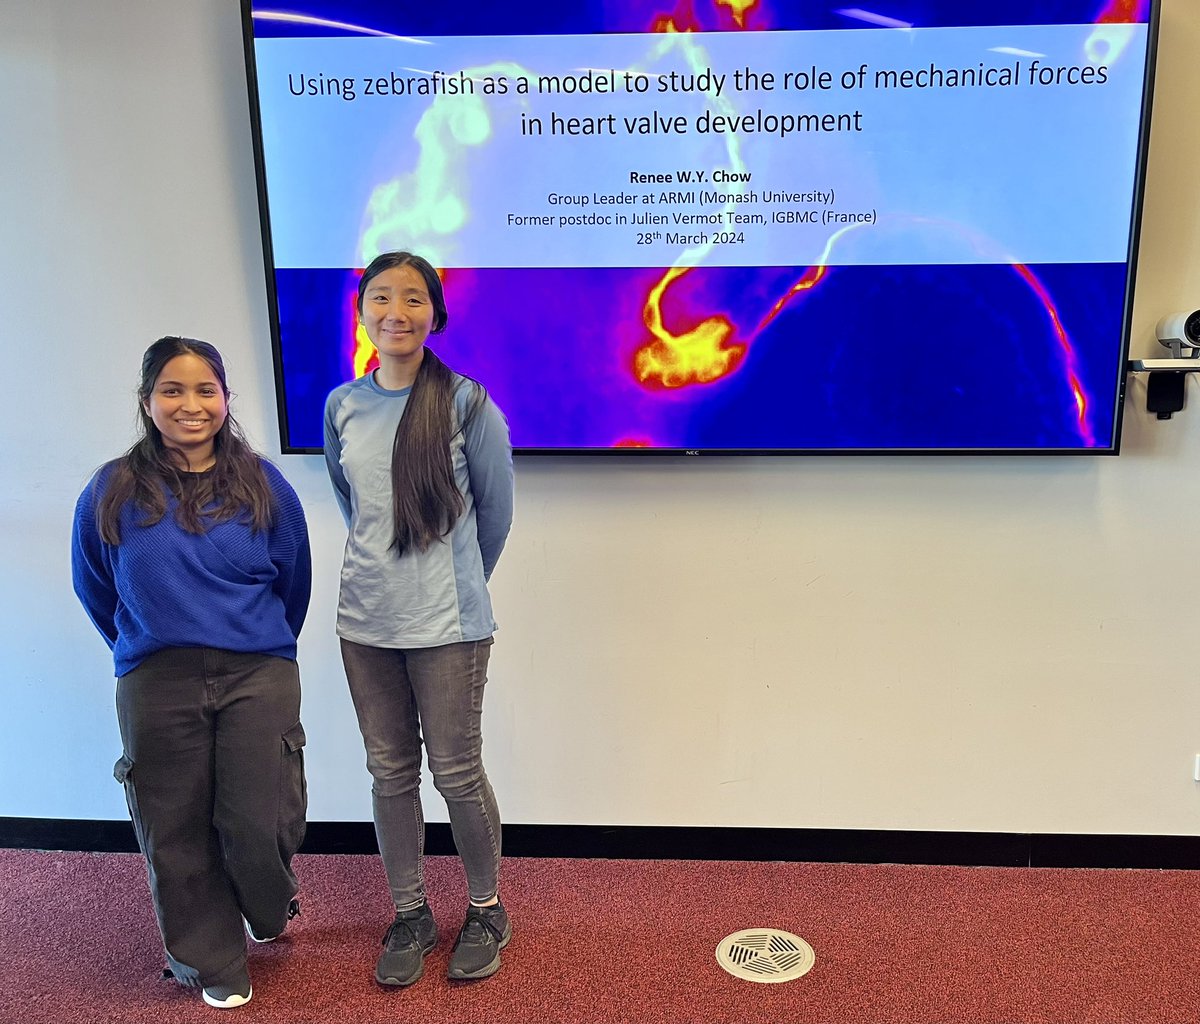 Today’s seminar perfectly showcased the intersection of cell biology and bioengineering with @reneechow7’s research on forces in heart valve development and Aafreen Ansari’s work on photodynamic hydrogels for mechanobiology. @monashengineers @ARMI_Labs